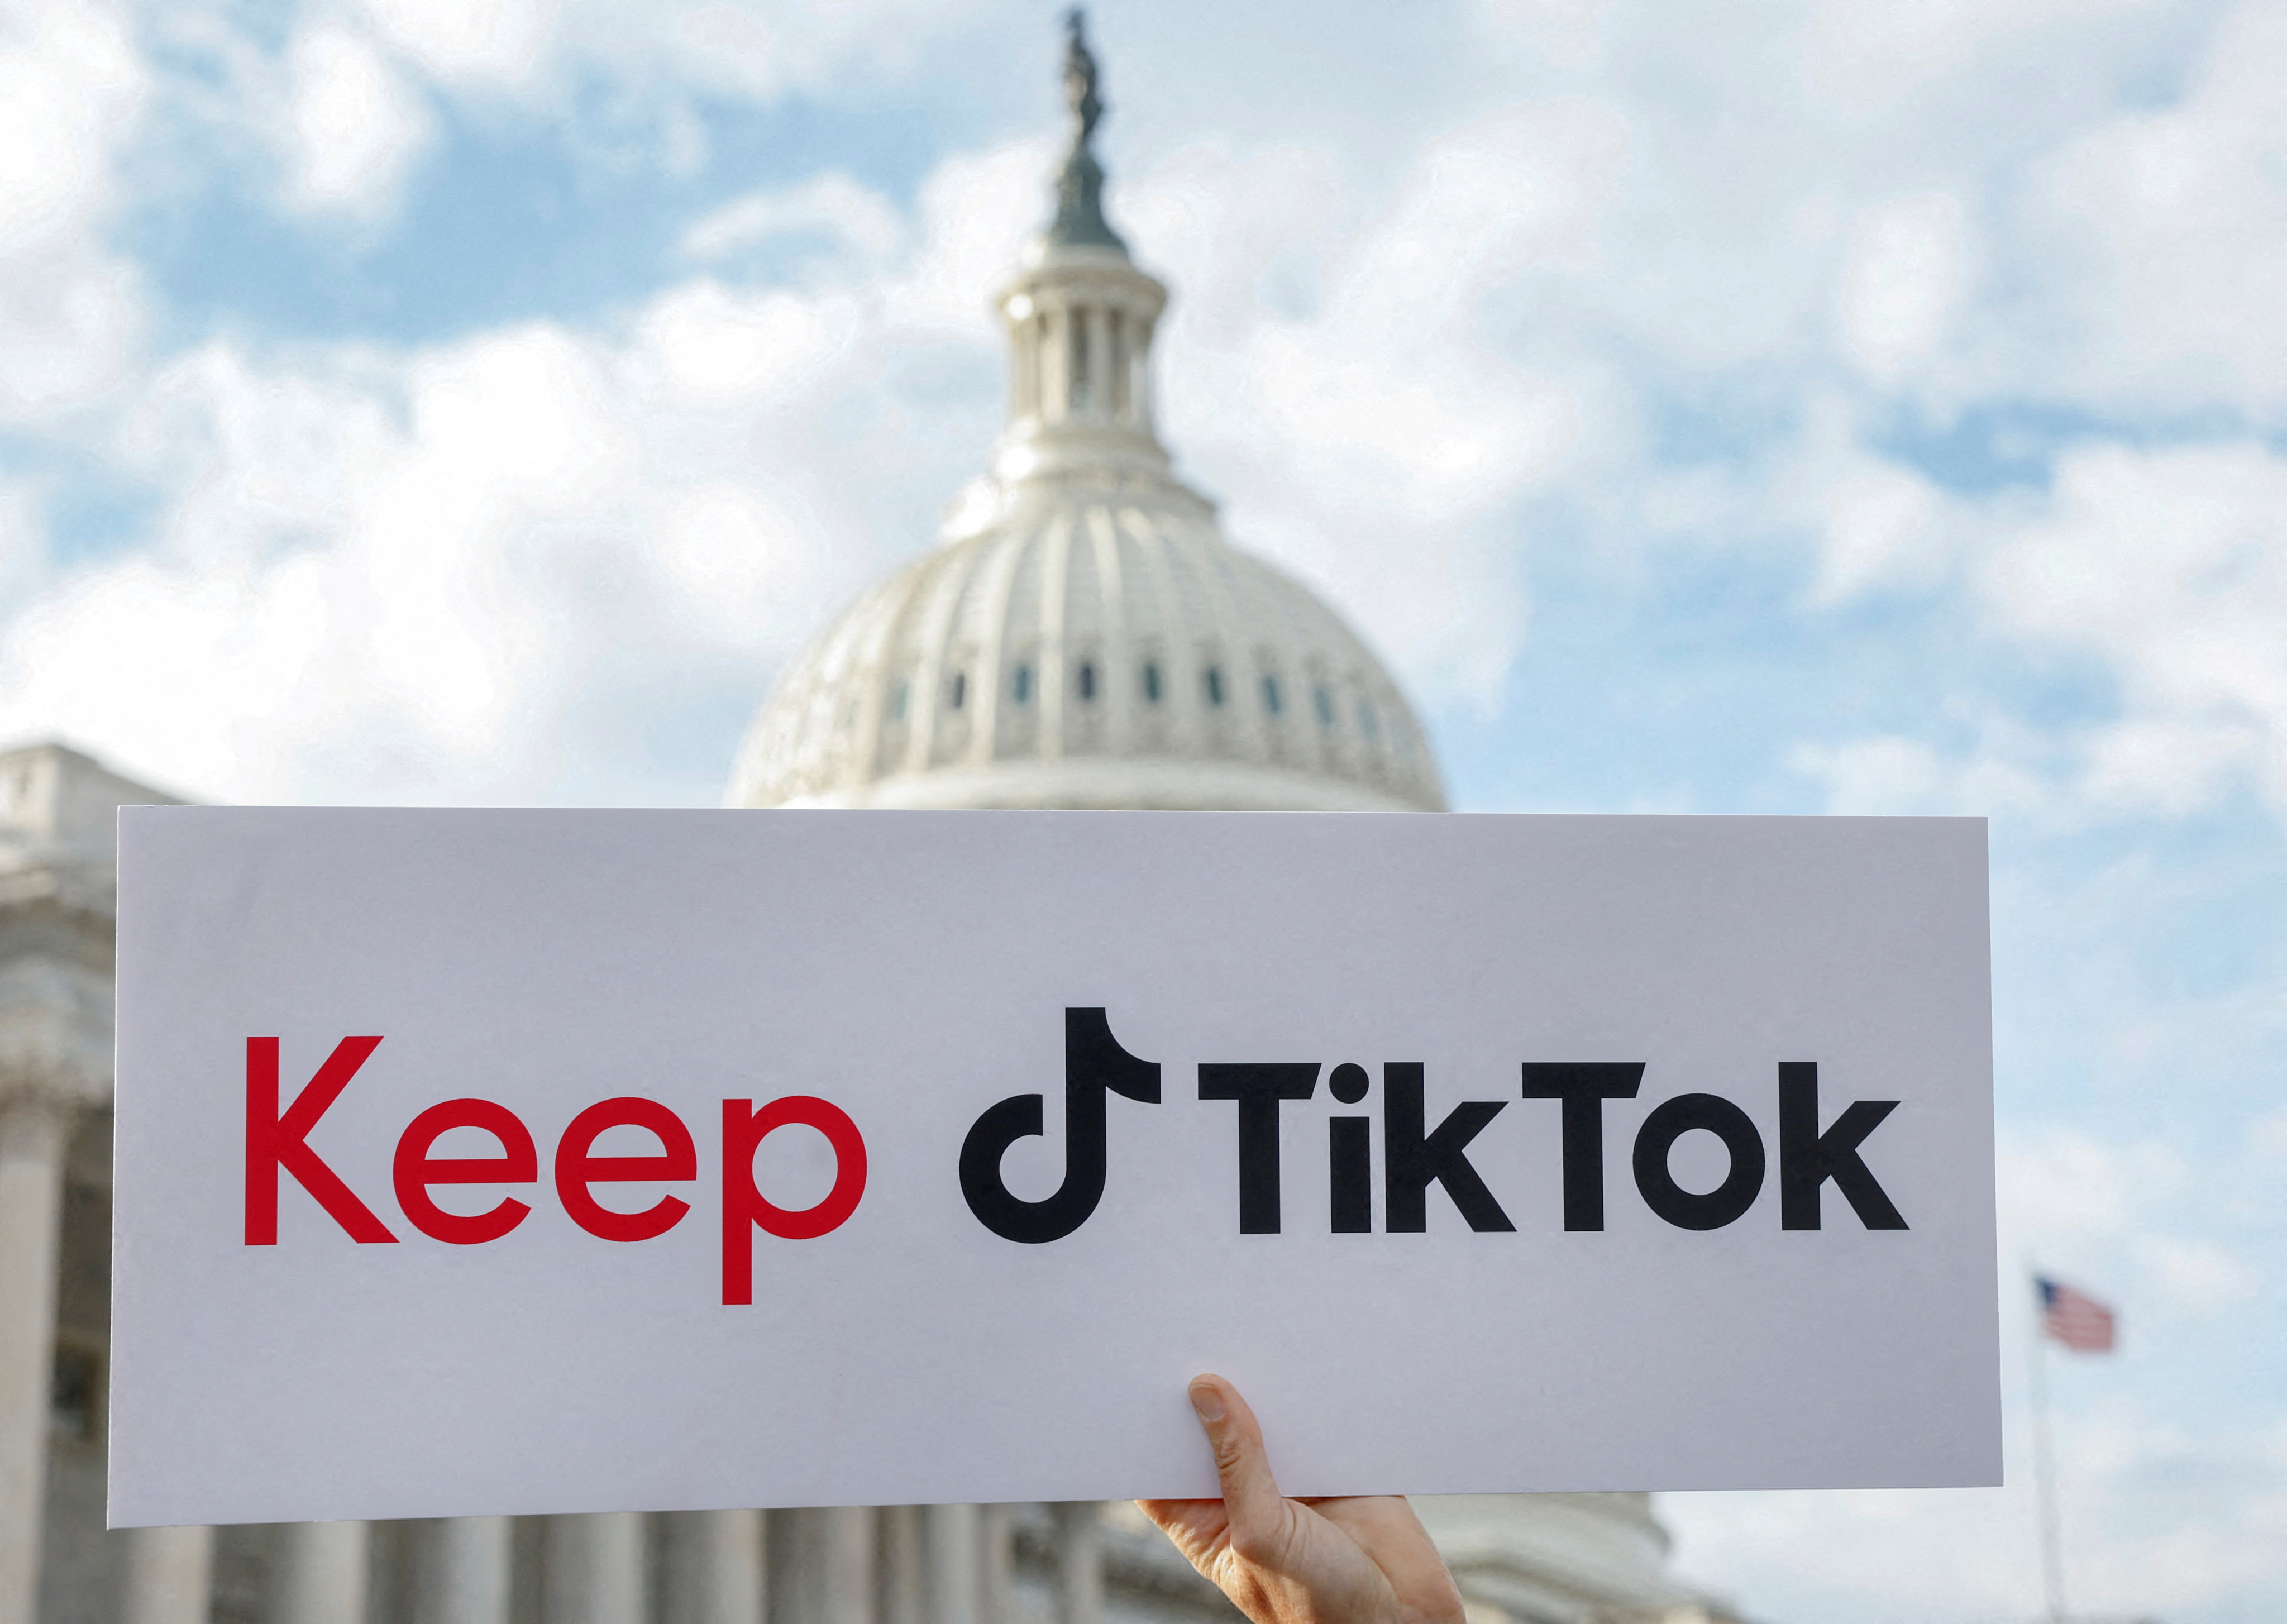 A sign is held up in front of the US Capitol as TikTok creators hold a news conference to speak out against a possible ban on the app in March. Photo: Reuters